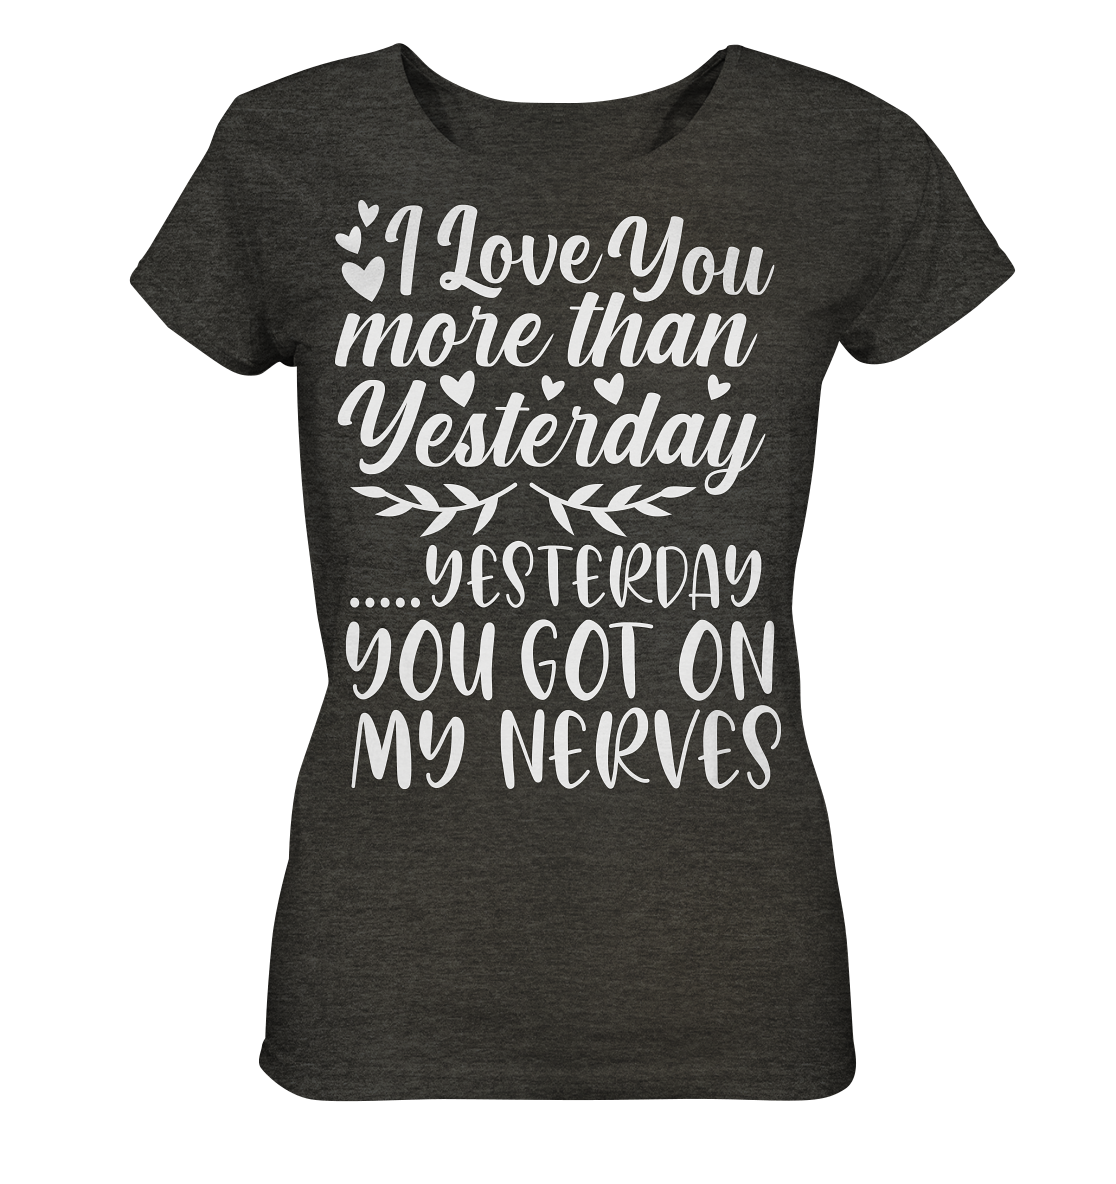 I love you more than yesterday  - Ladies Organic Shirt (meliert)